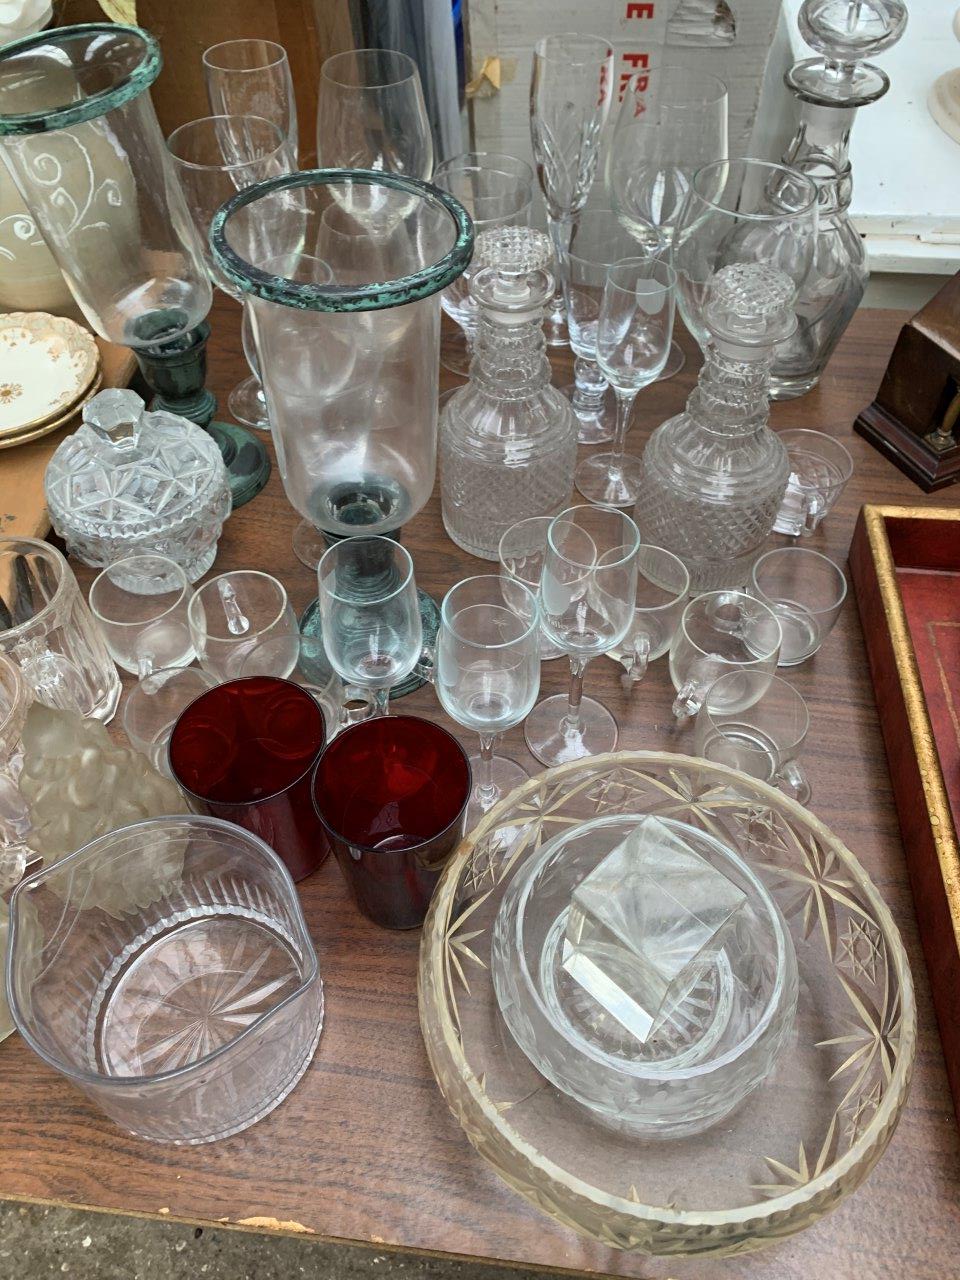 Large quantity of chinaware, glassware, pottery, metal ware. - Image 3 of 6